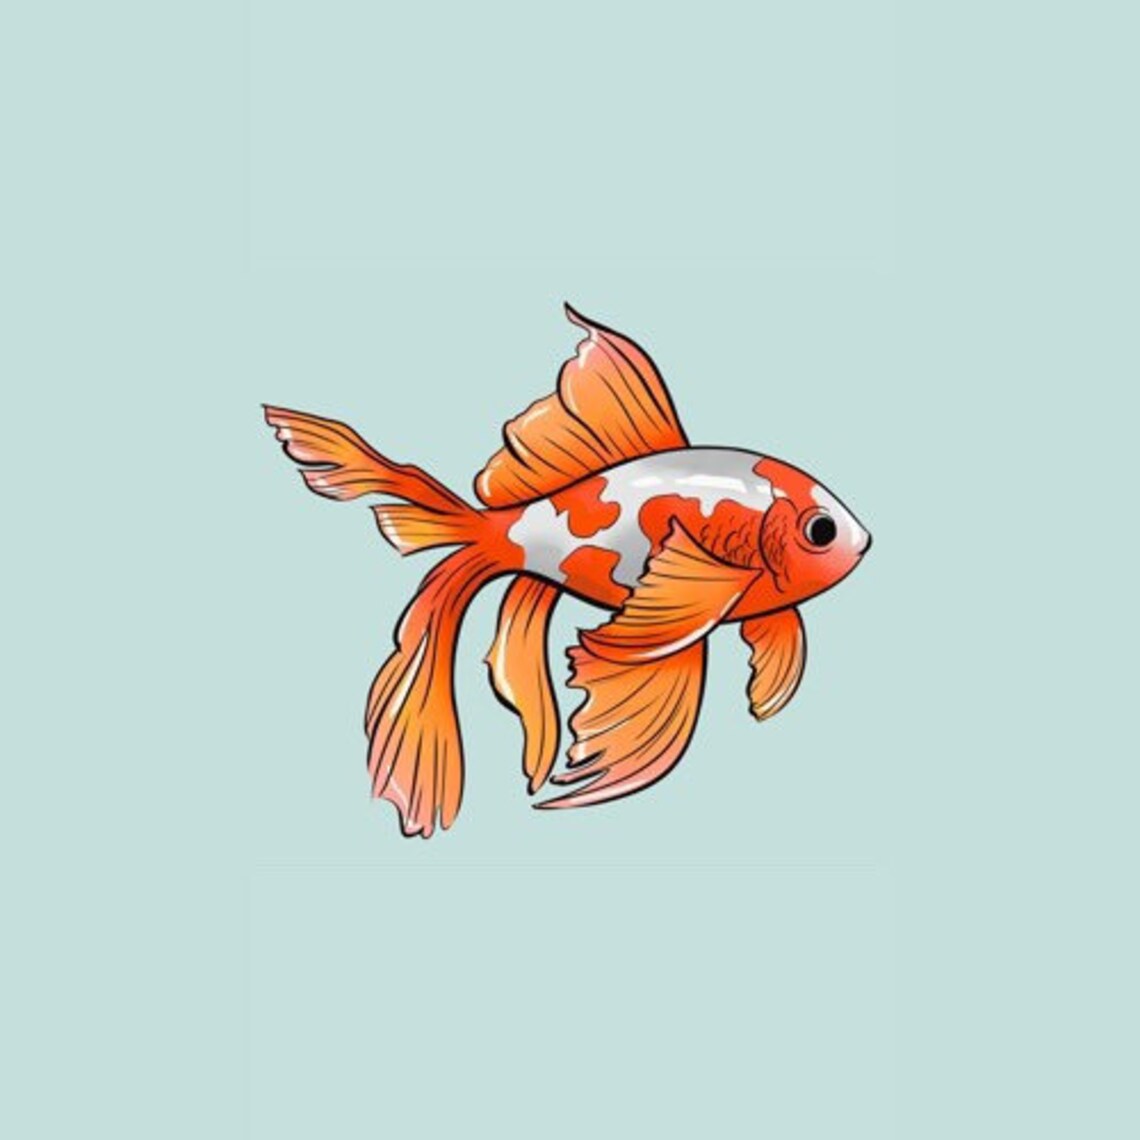 Orange and white fish floating on top of a blue background.